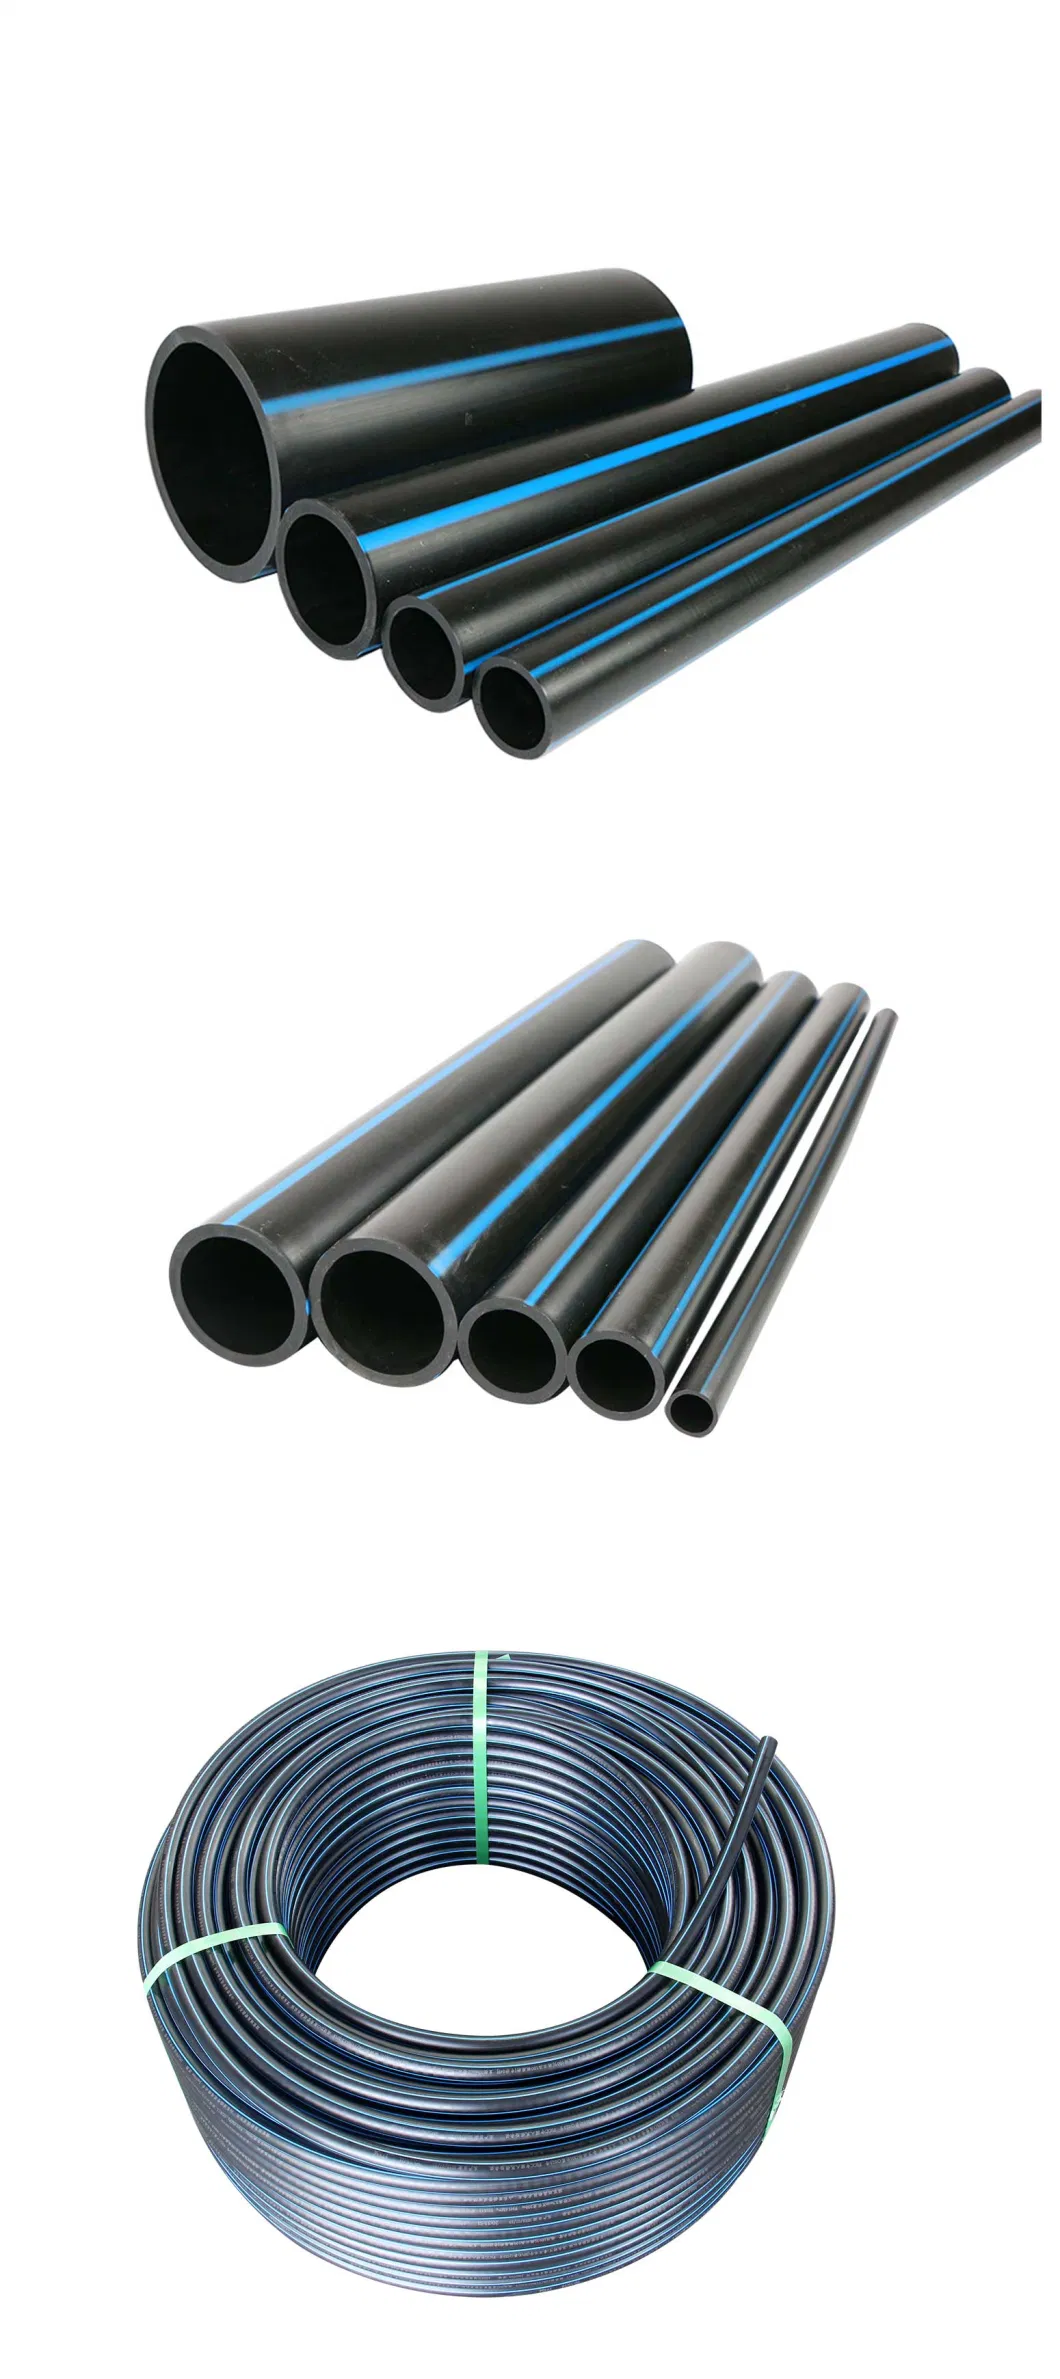 Siffo PE 100 New Tube HDPE Pipe DN110mm 16kg (16bar) Pressure Water Pipe for Building Construction